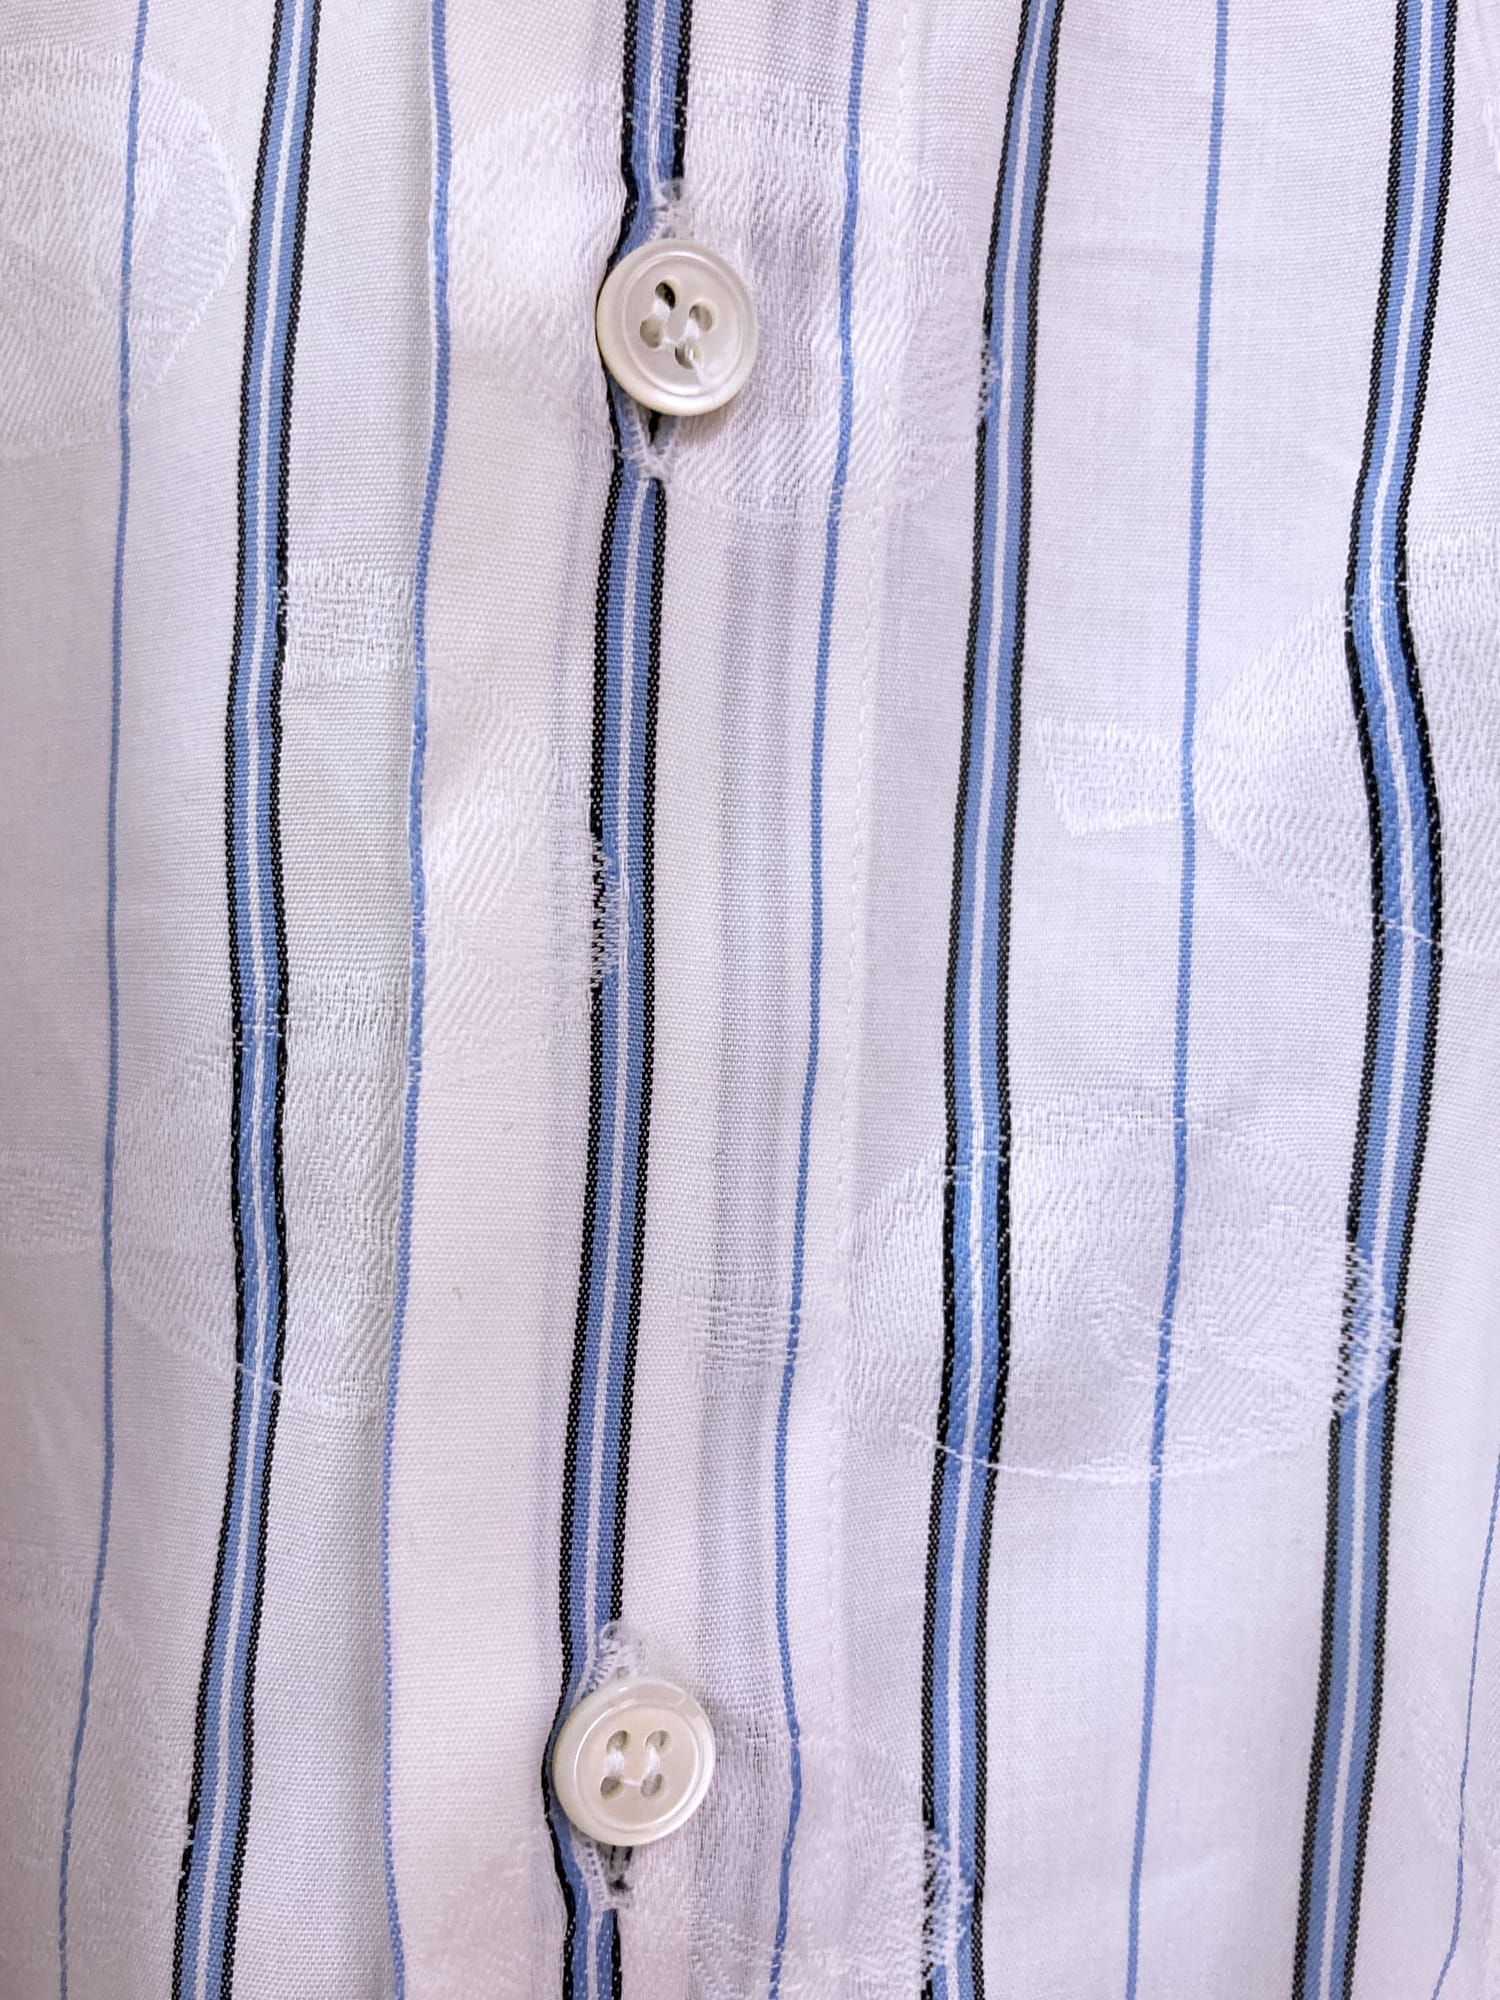 Gianni Versace 1980s white striped shirt with extremely subtle fish pattern